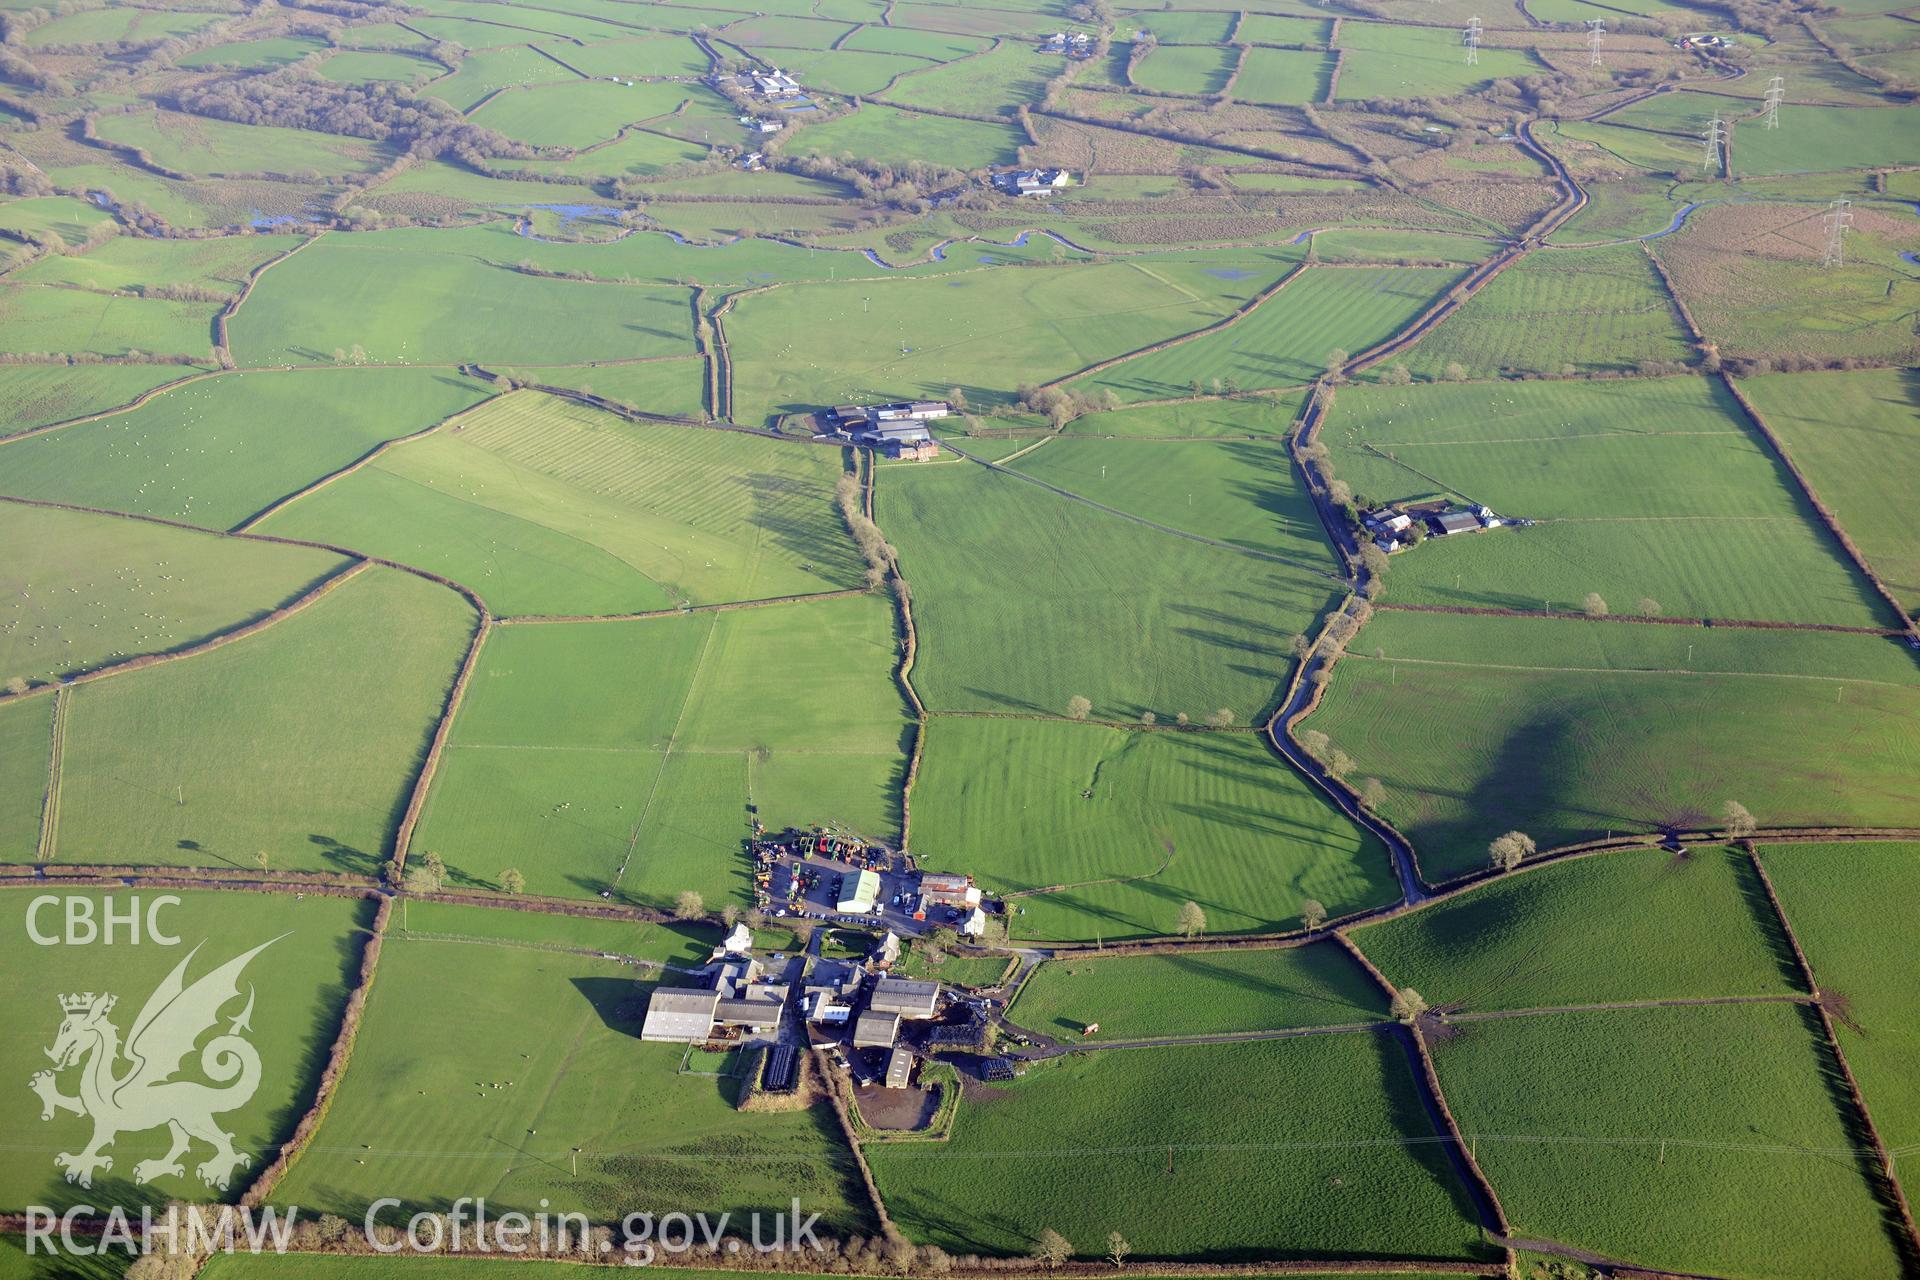 Deserted rural settlement, south east of Penyrheol. Oblique aerial photograph taken during the Royal Commission's programme of archaeological aerial reconnaissance by Toby Driver on 6th January 2015.